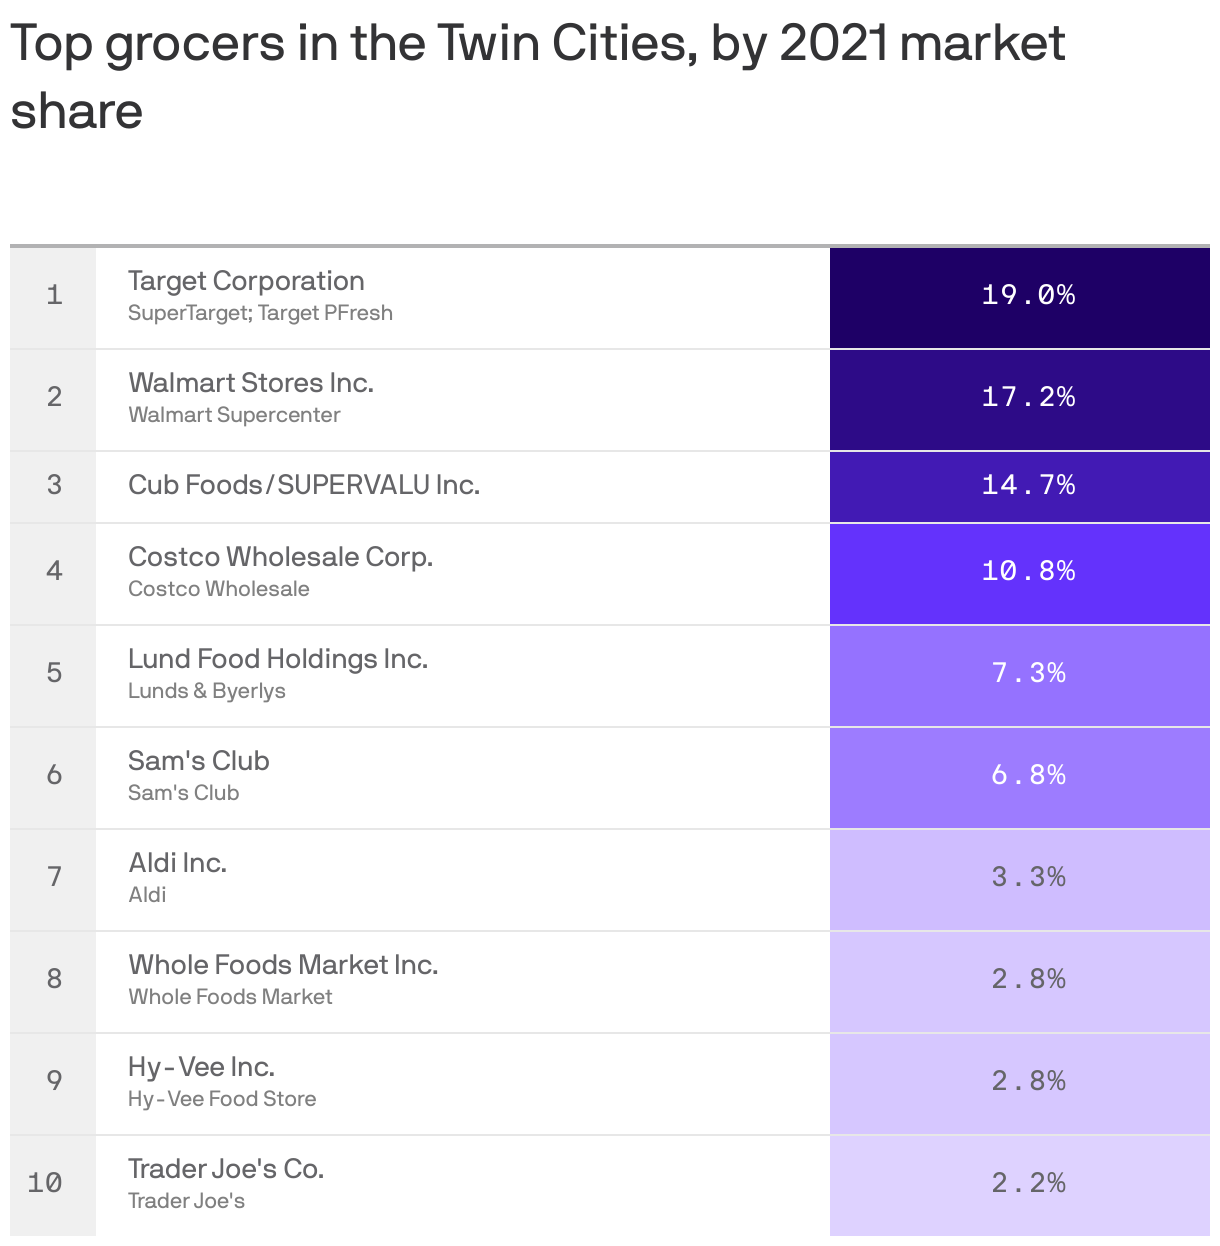 Top grocers in the Twin Cities, by 2021 market share